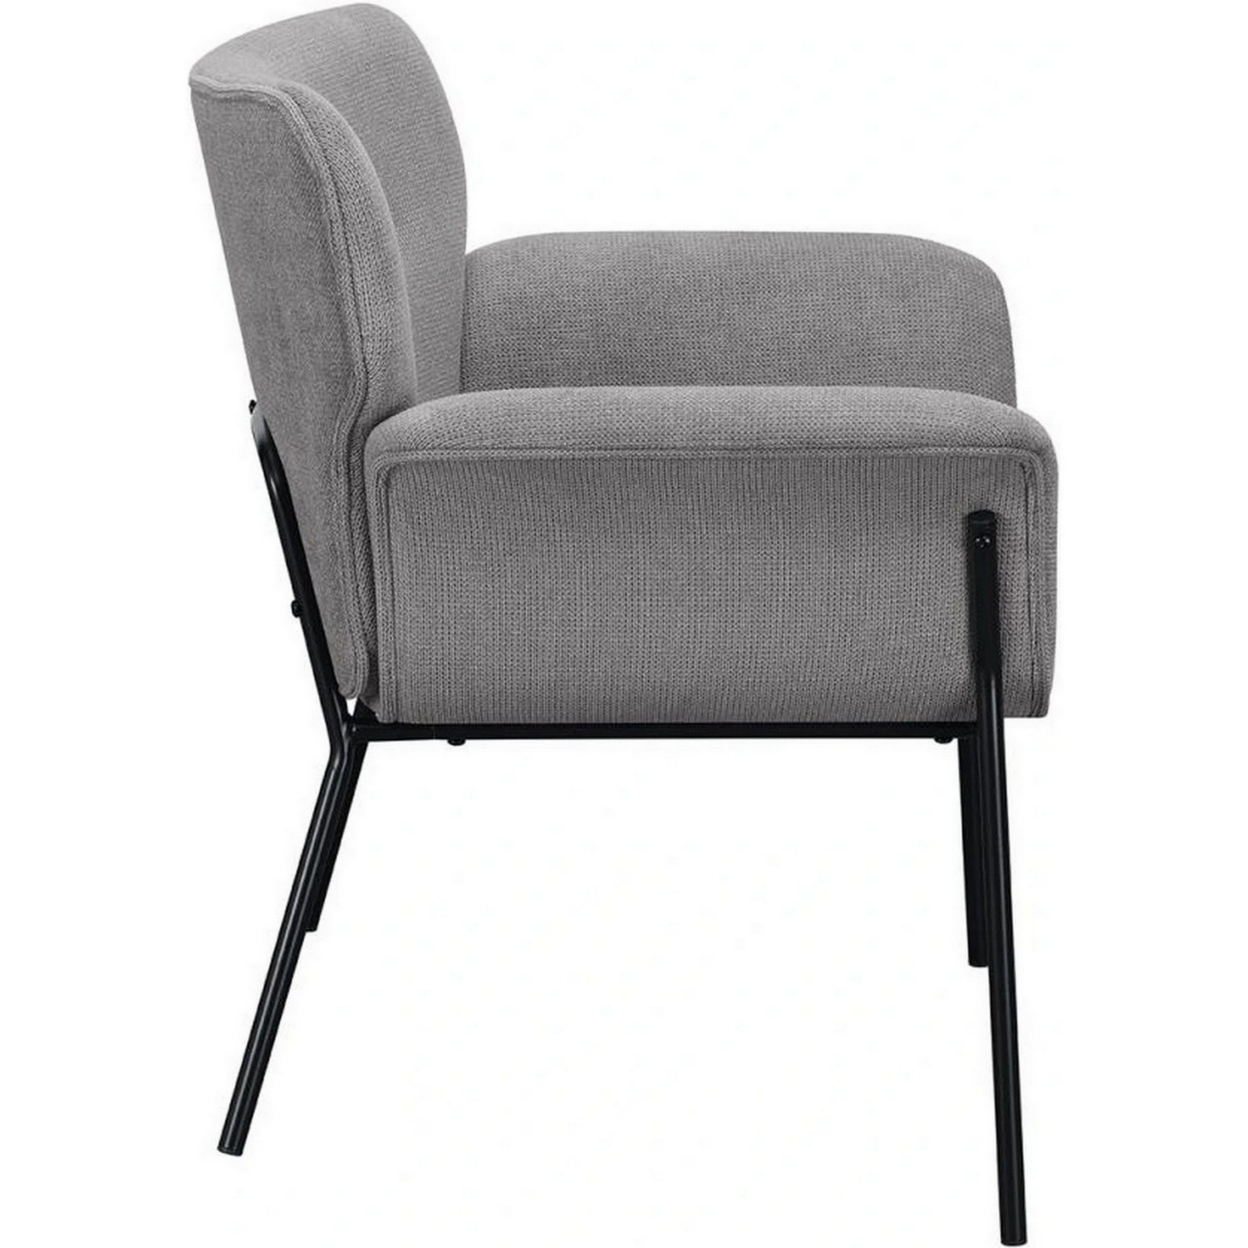 Leah 32 Inch Accent Chair, Woven Fabric Upholstery, Angled Metal Legs, Gray